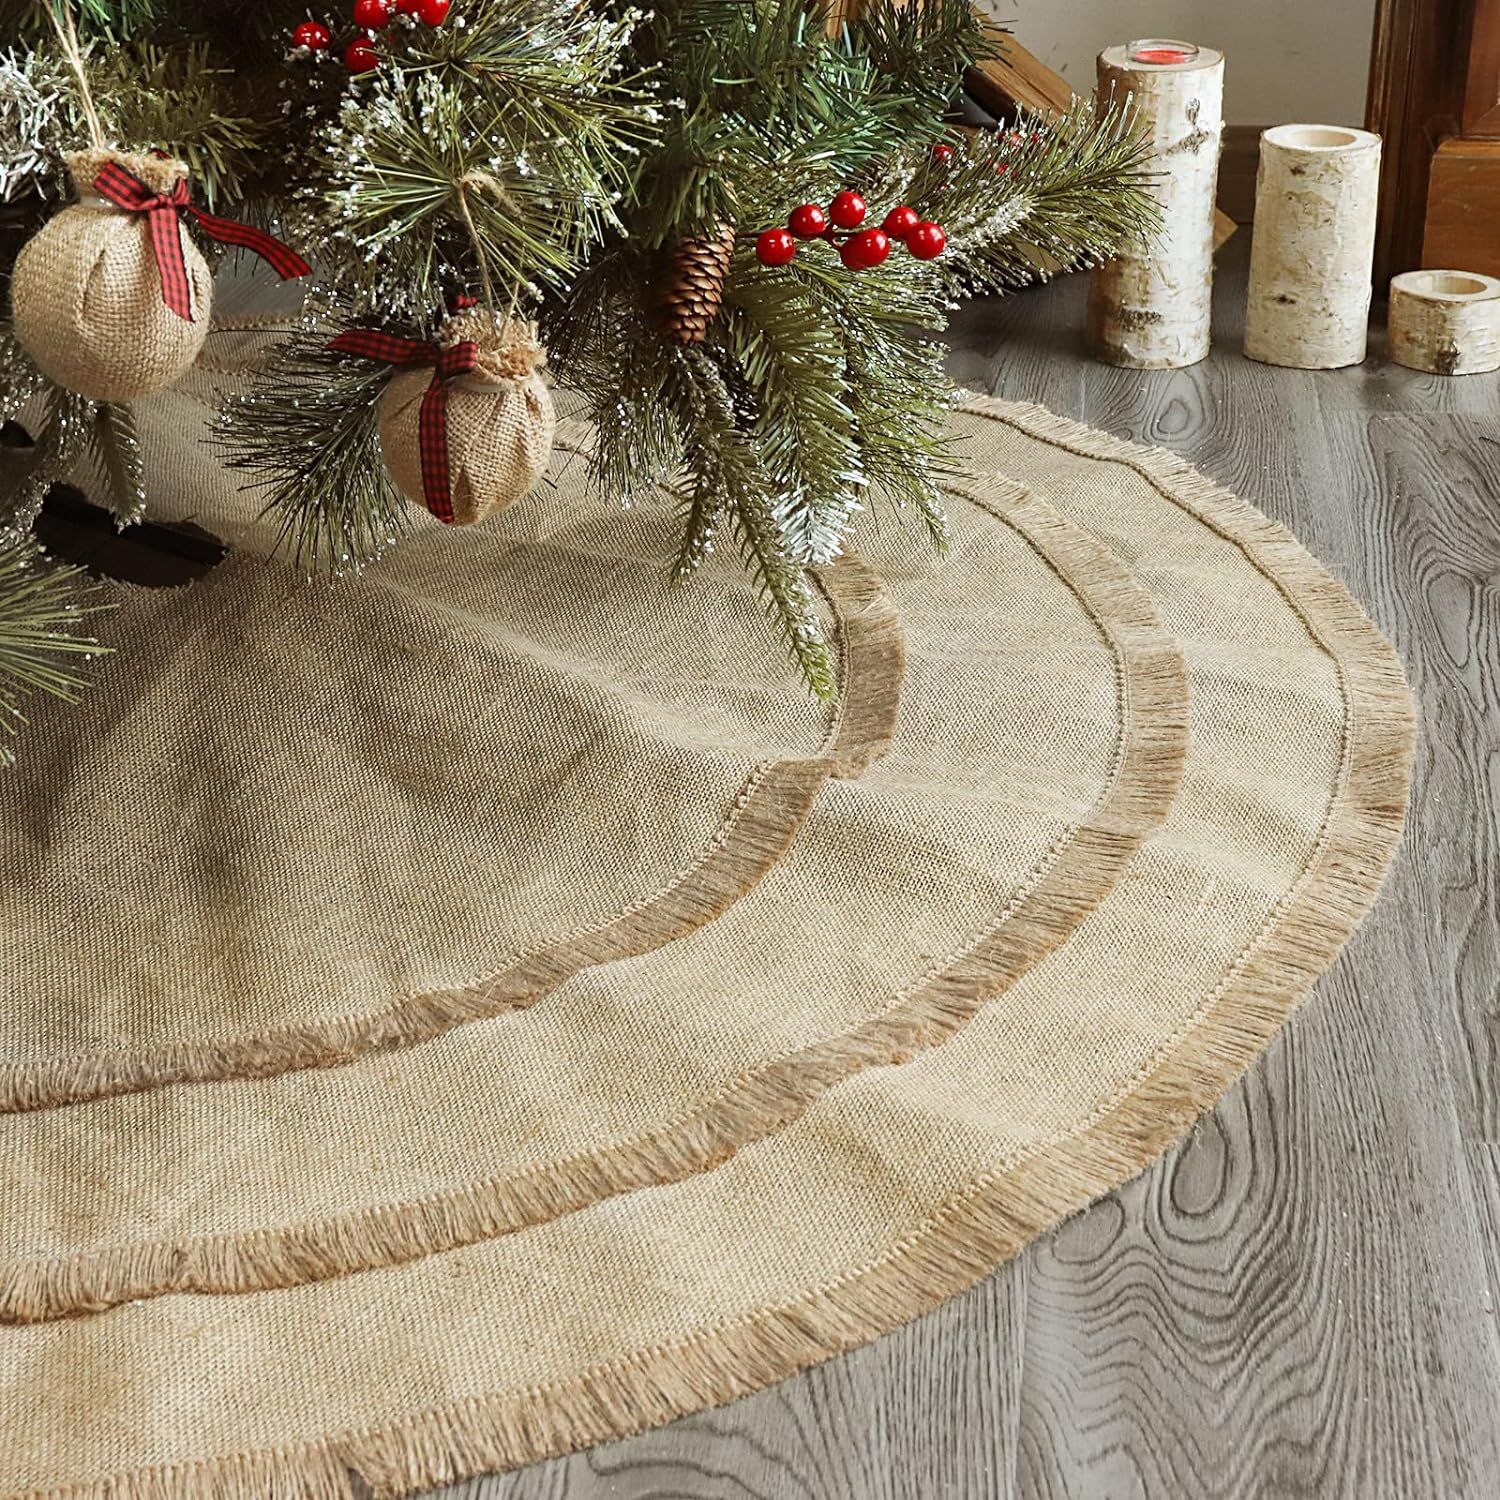 Ivenf Christmas Tree Skirt, 48 inches Natural Burlap Jute Plain with Tassels, Rustic Xmas Holiday... | Amazon (US)